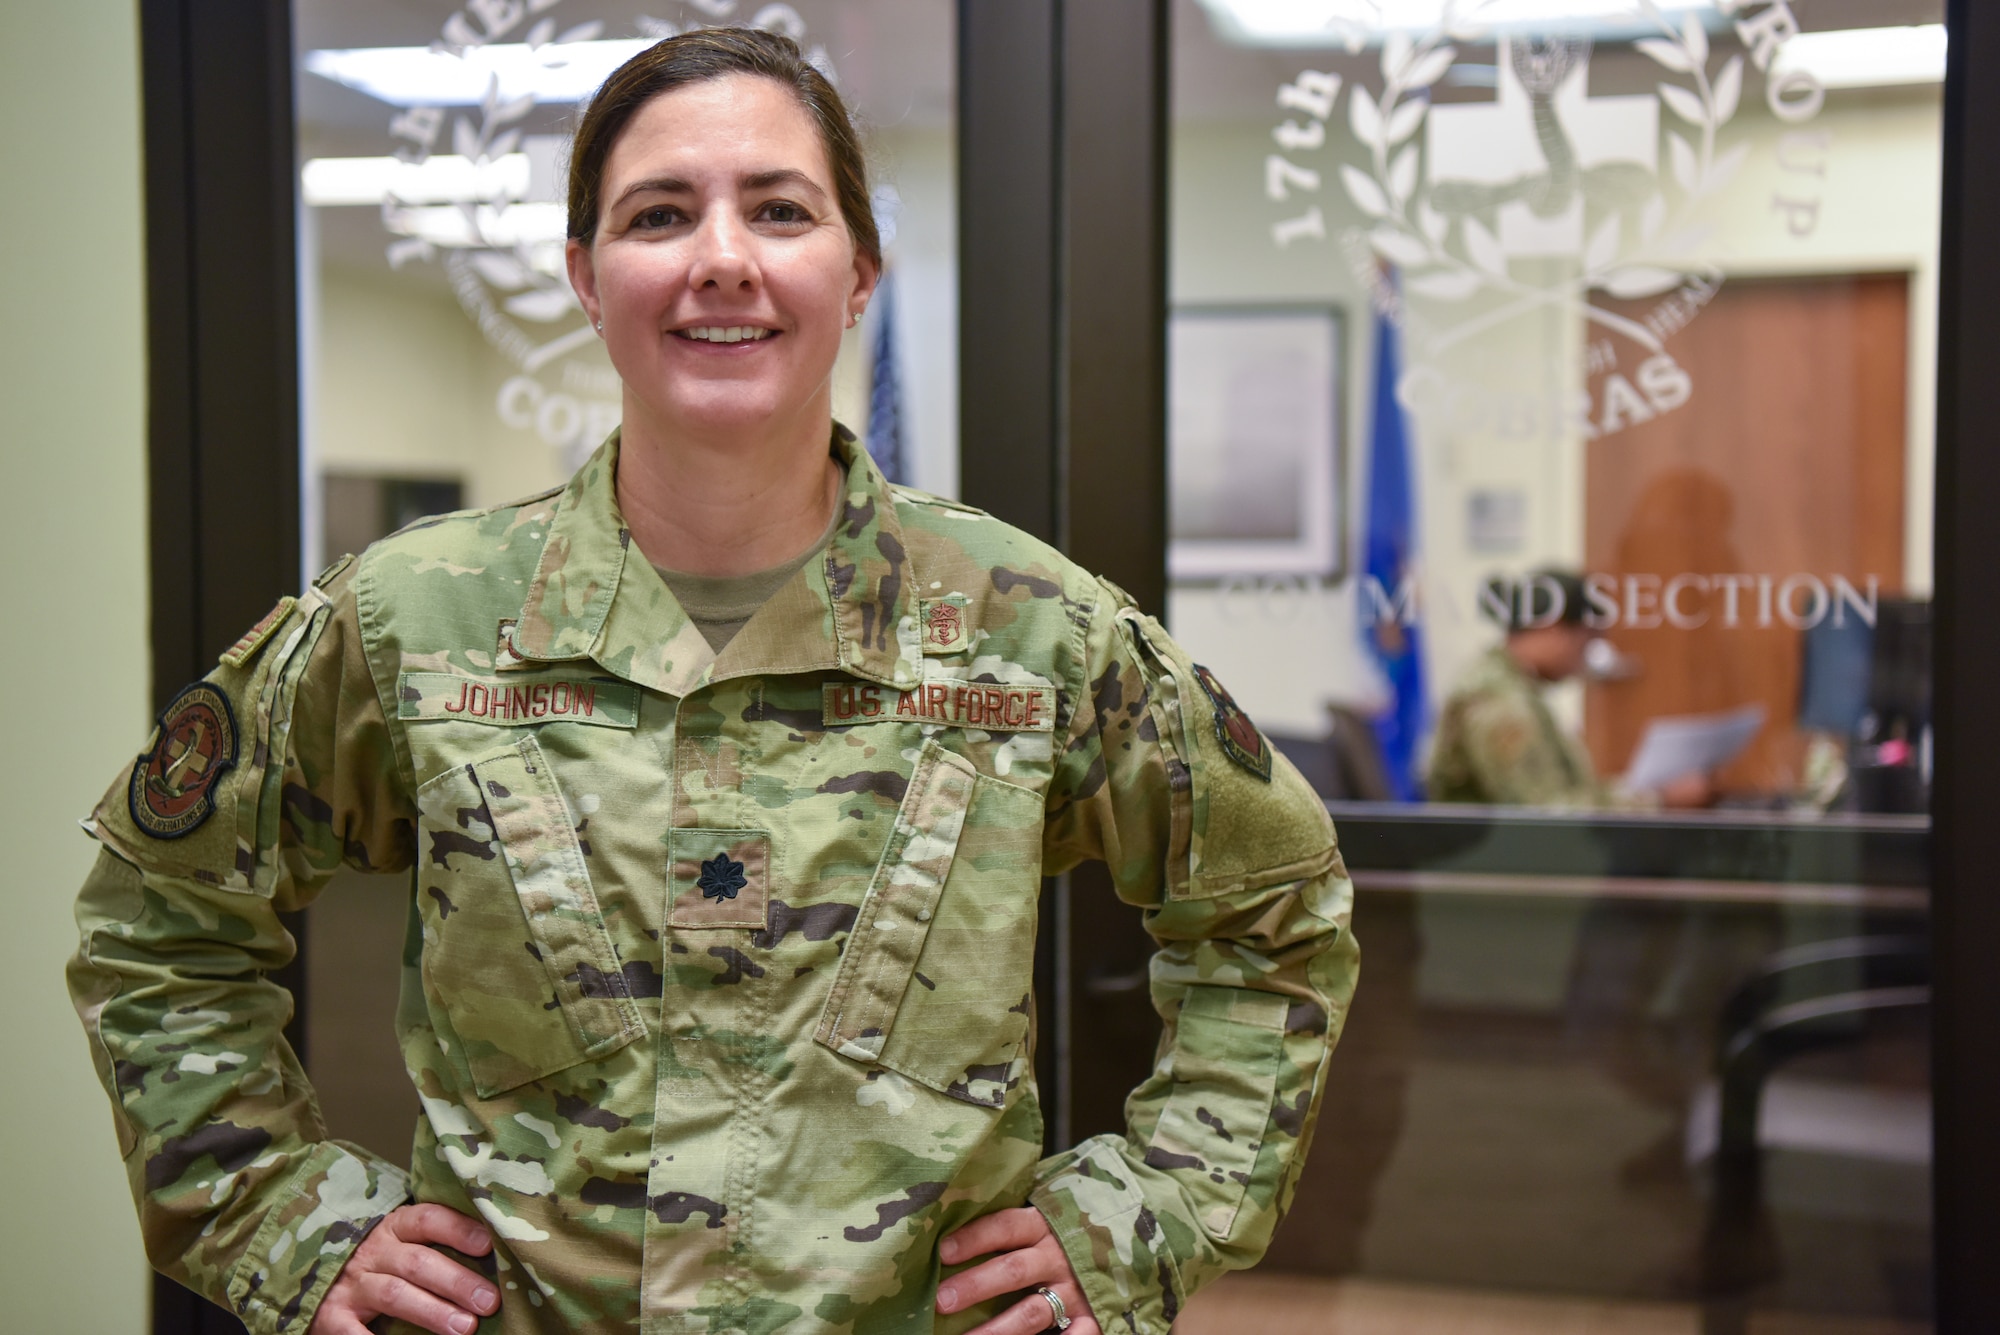 U.S. Air Force Lt. Col. Jennifer Johnson, 17th Healthcare Operations Squadron commander, poses for a photo, Goodfellow Air Force Base, Texas, Jul 14, 2022. Johnson’s leadership philosophy focuses on taking care of people and cultivating the environment. (U.S. Air Force photo by Staff Sergeant Jermaine Ayers)